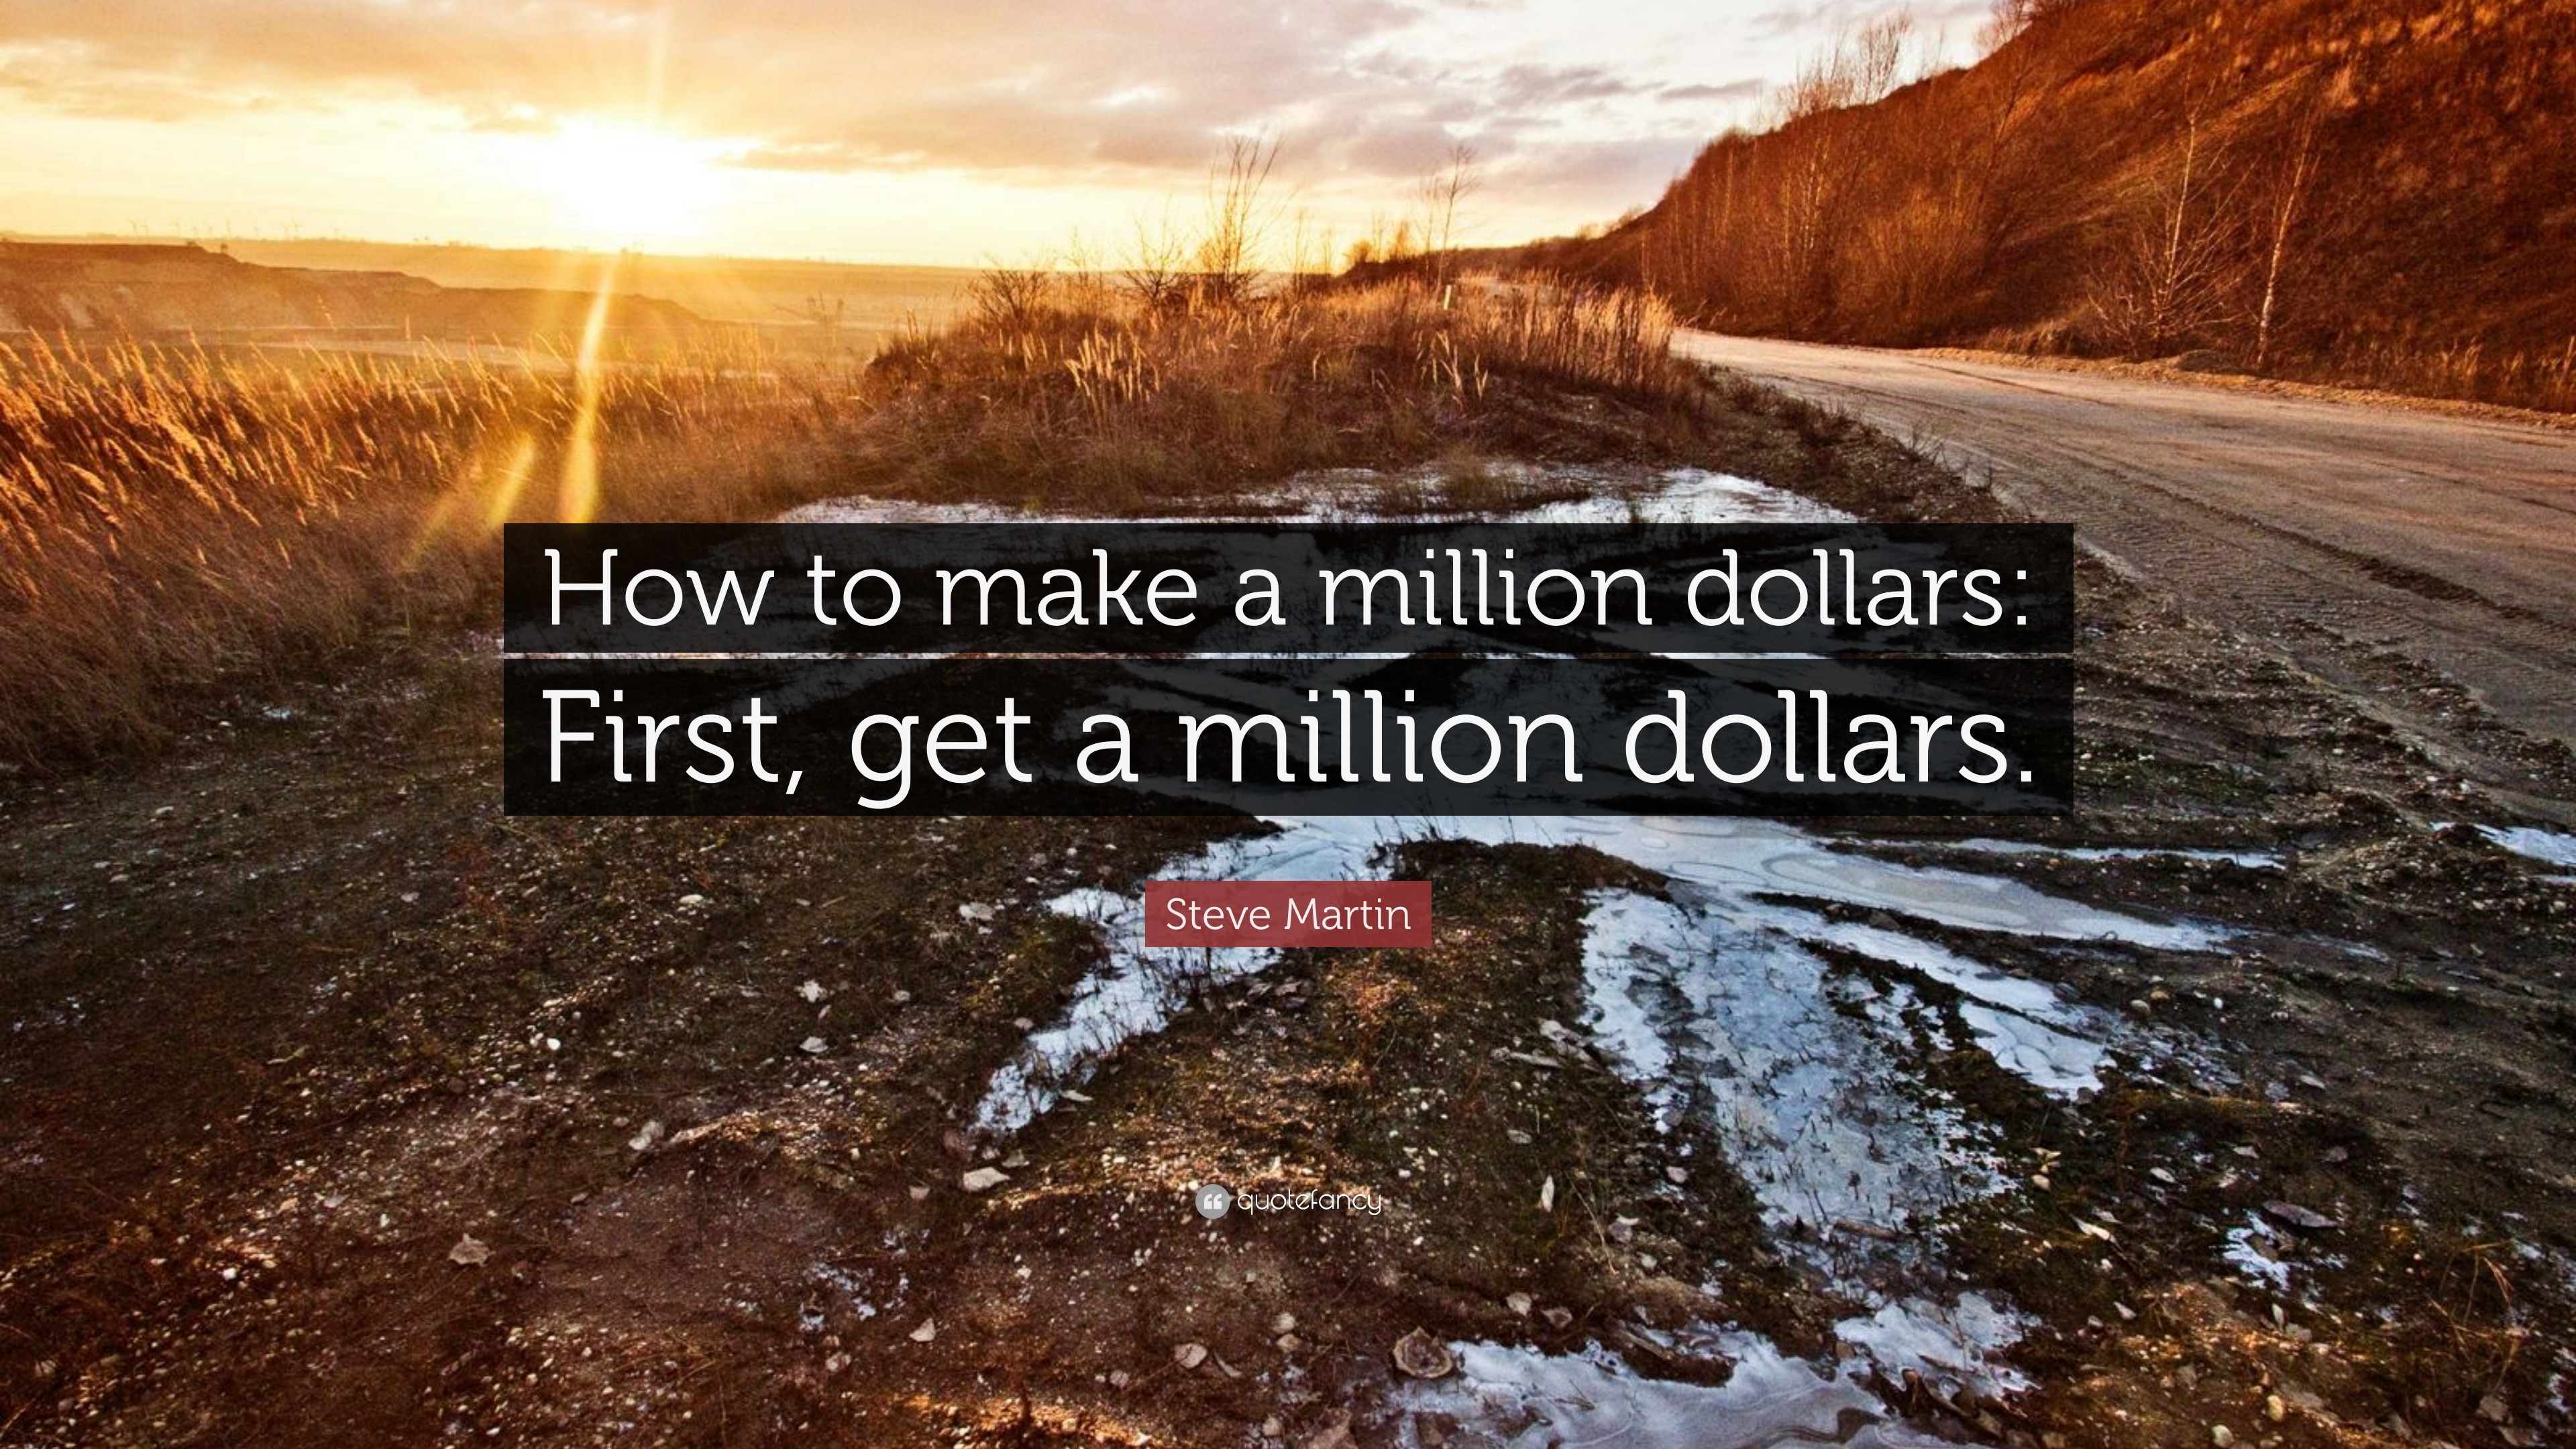 Steve Martin Quote “how To Make A Million Dollars First Get A